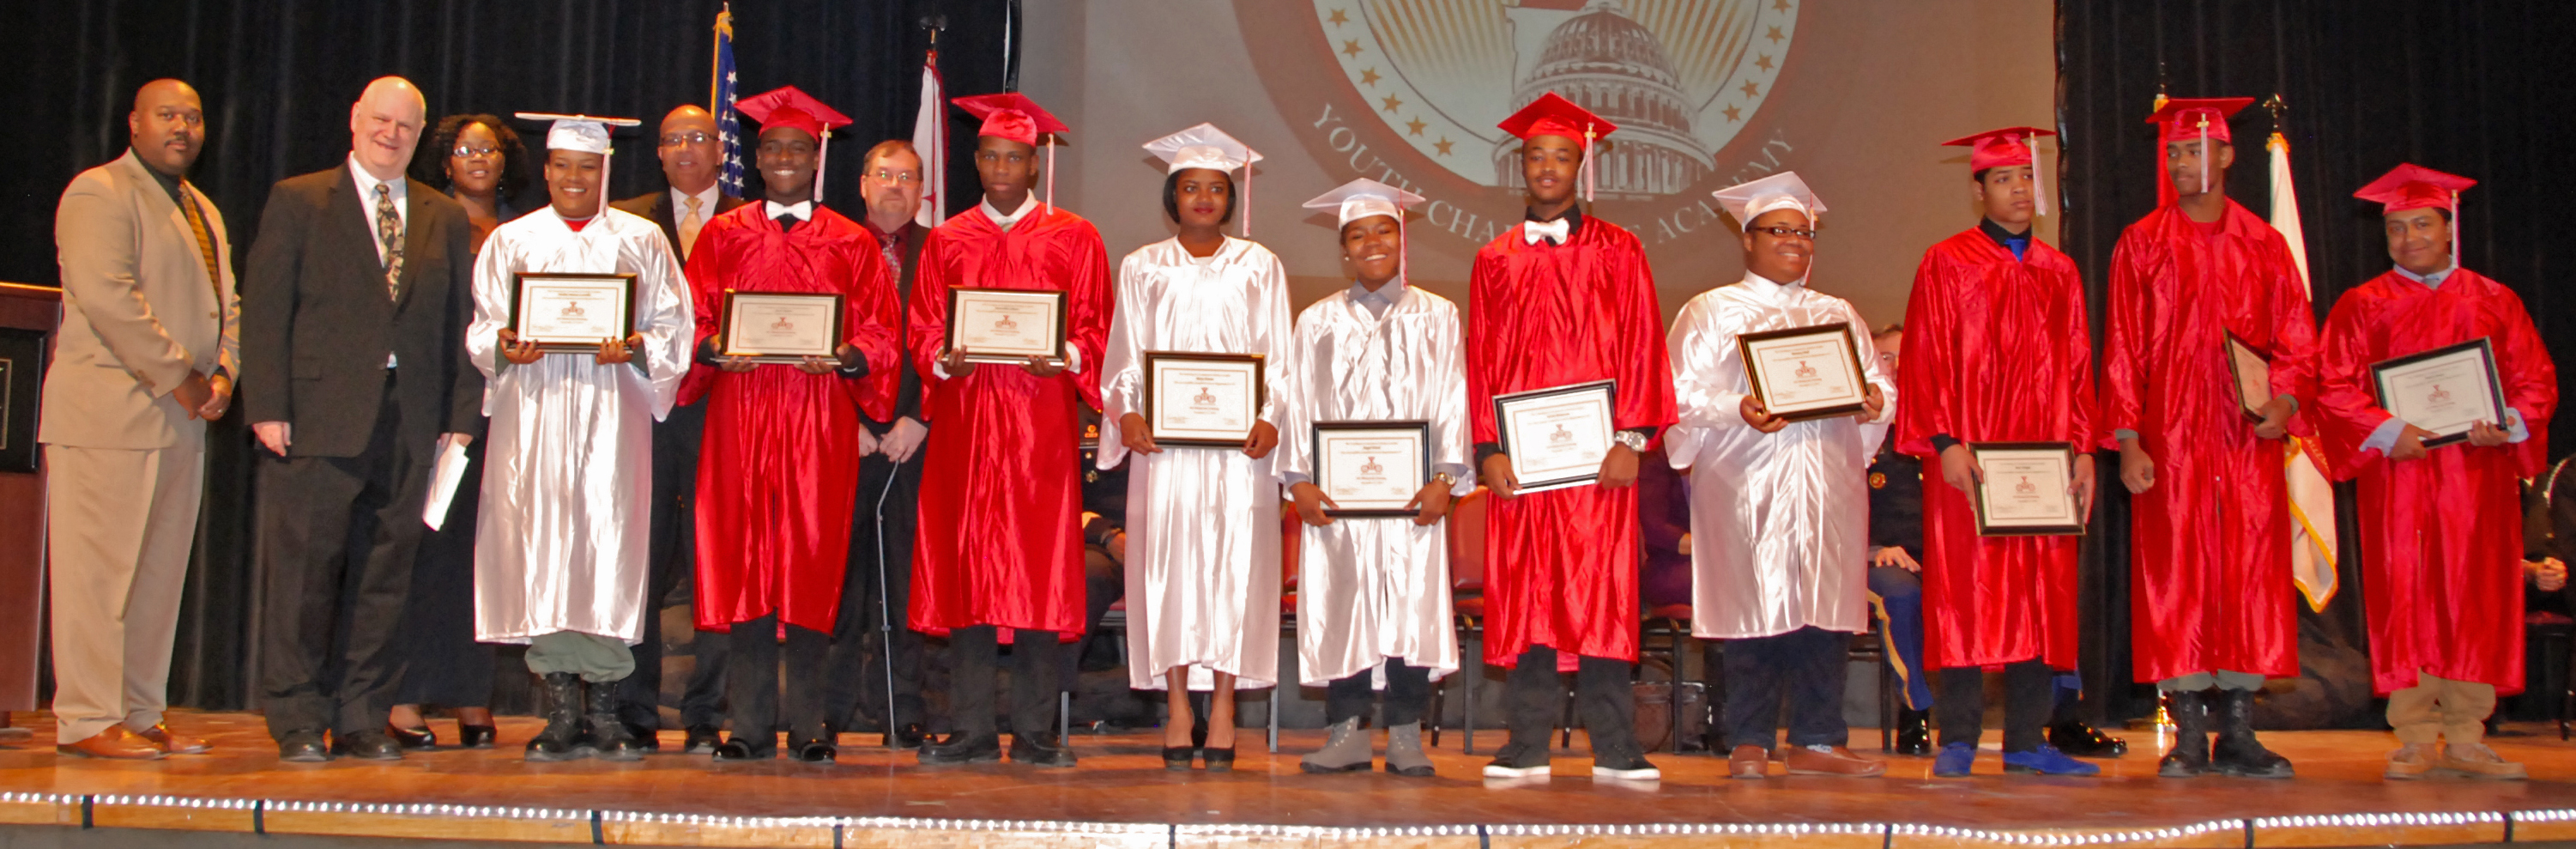 3D ThinkLink graduates from Capital Guardian Youth ChalleNGe Academy, December 2014